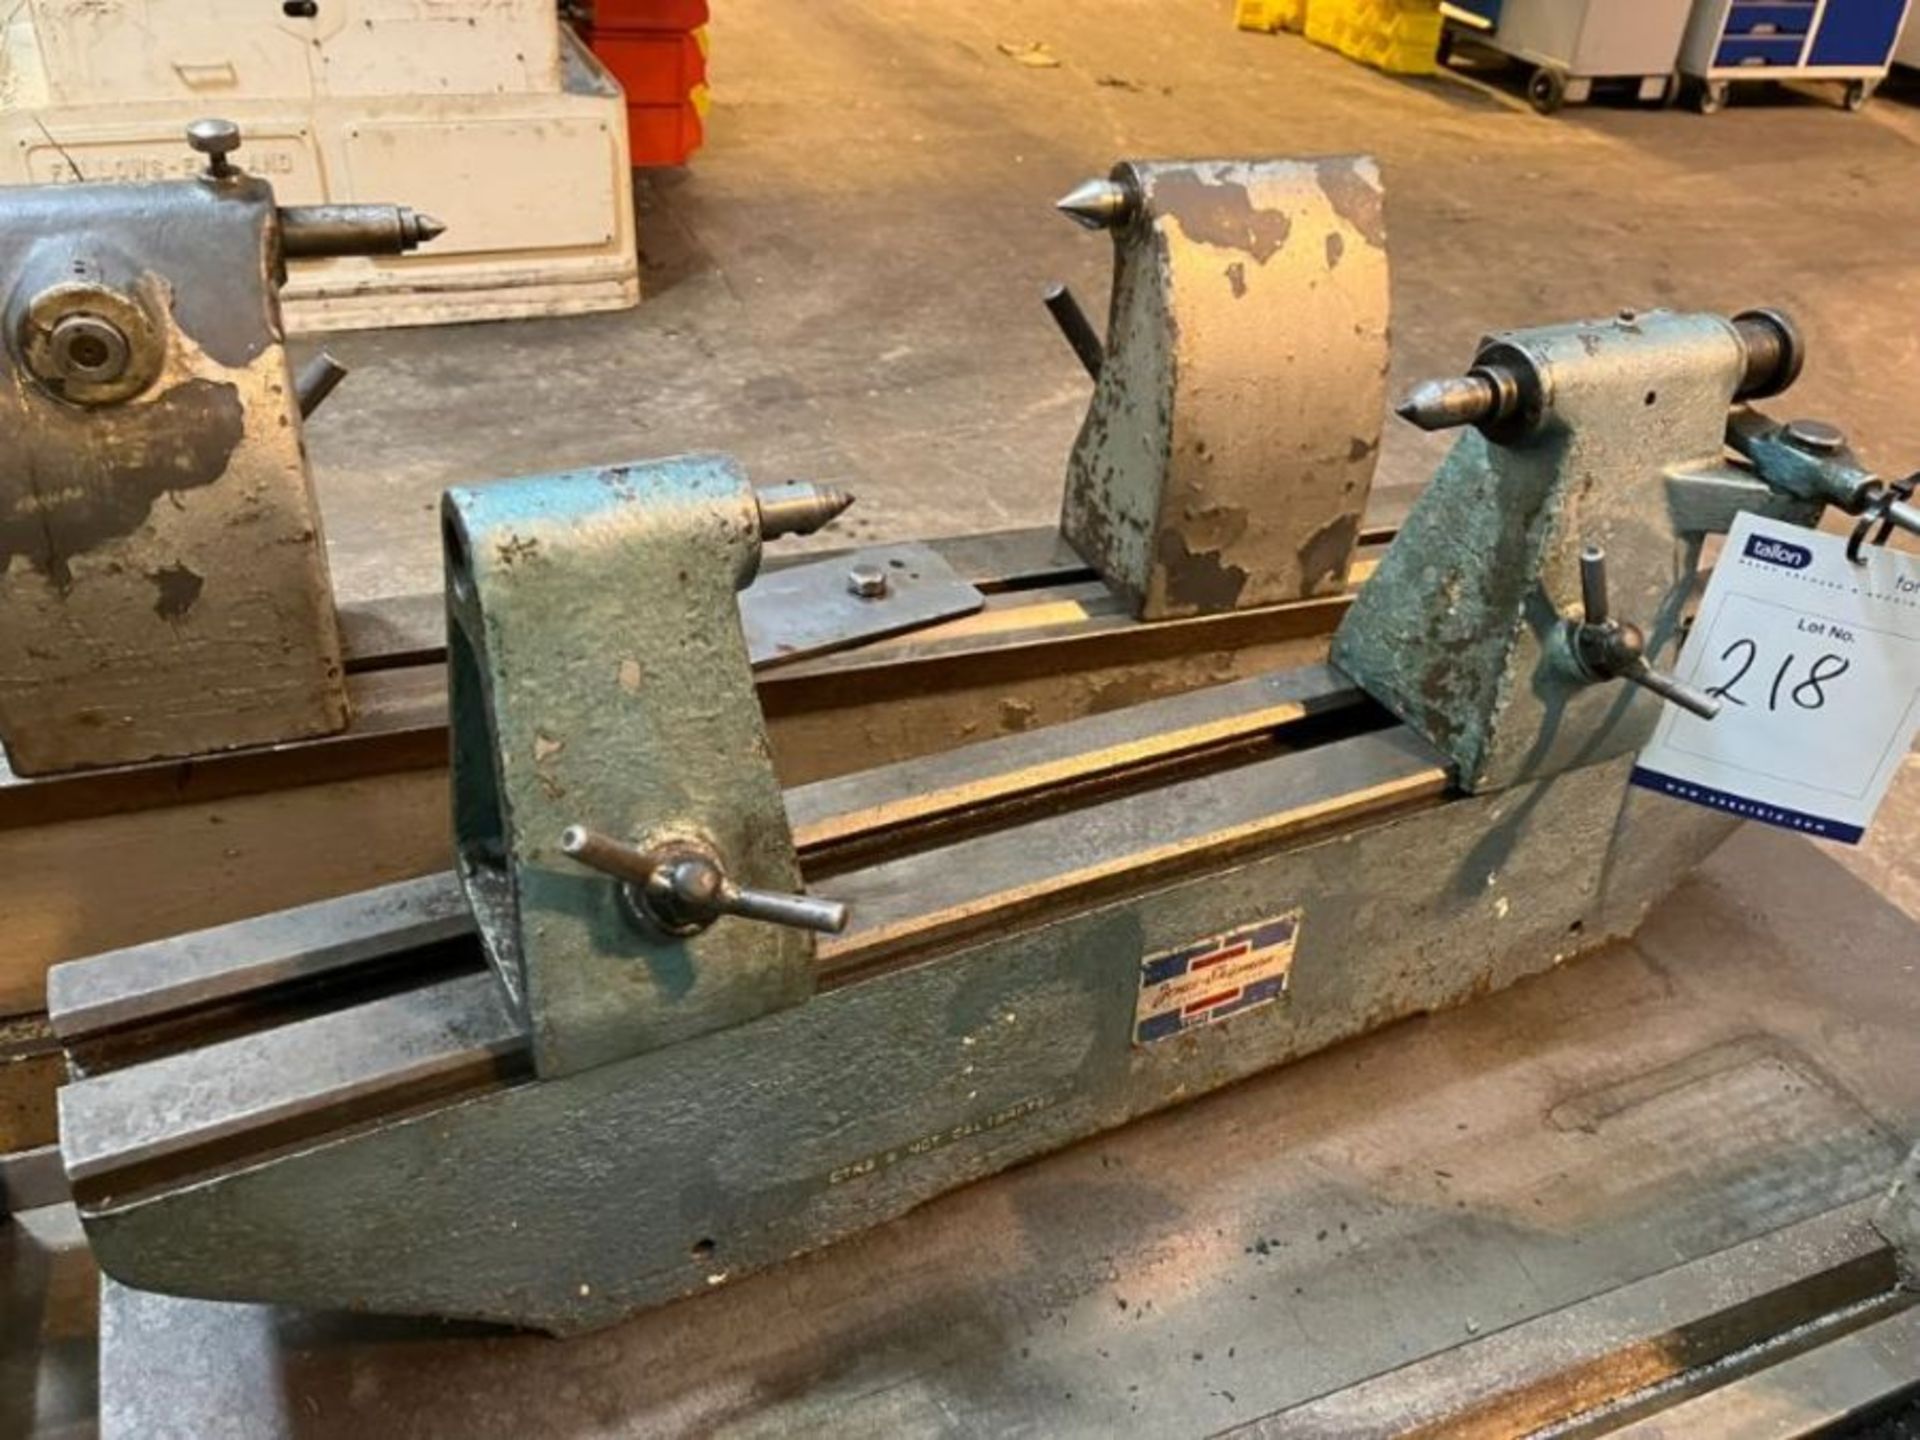 Joines & Shipman type 2200 - 222 bench centres